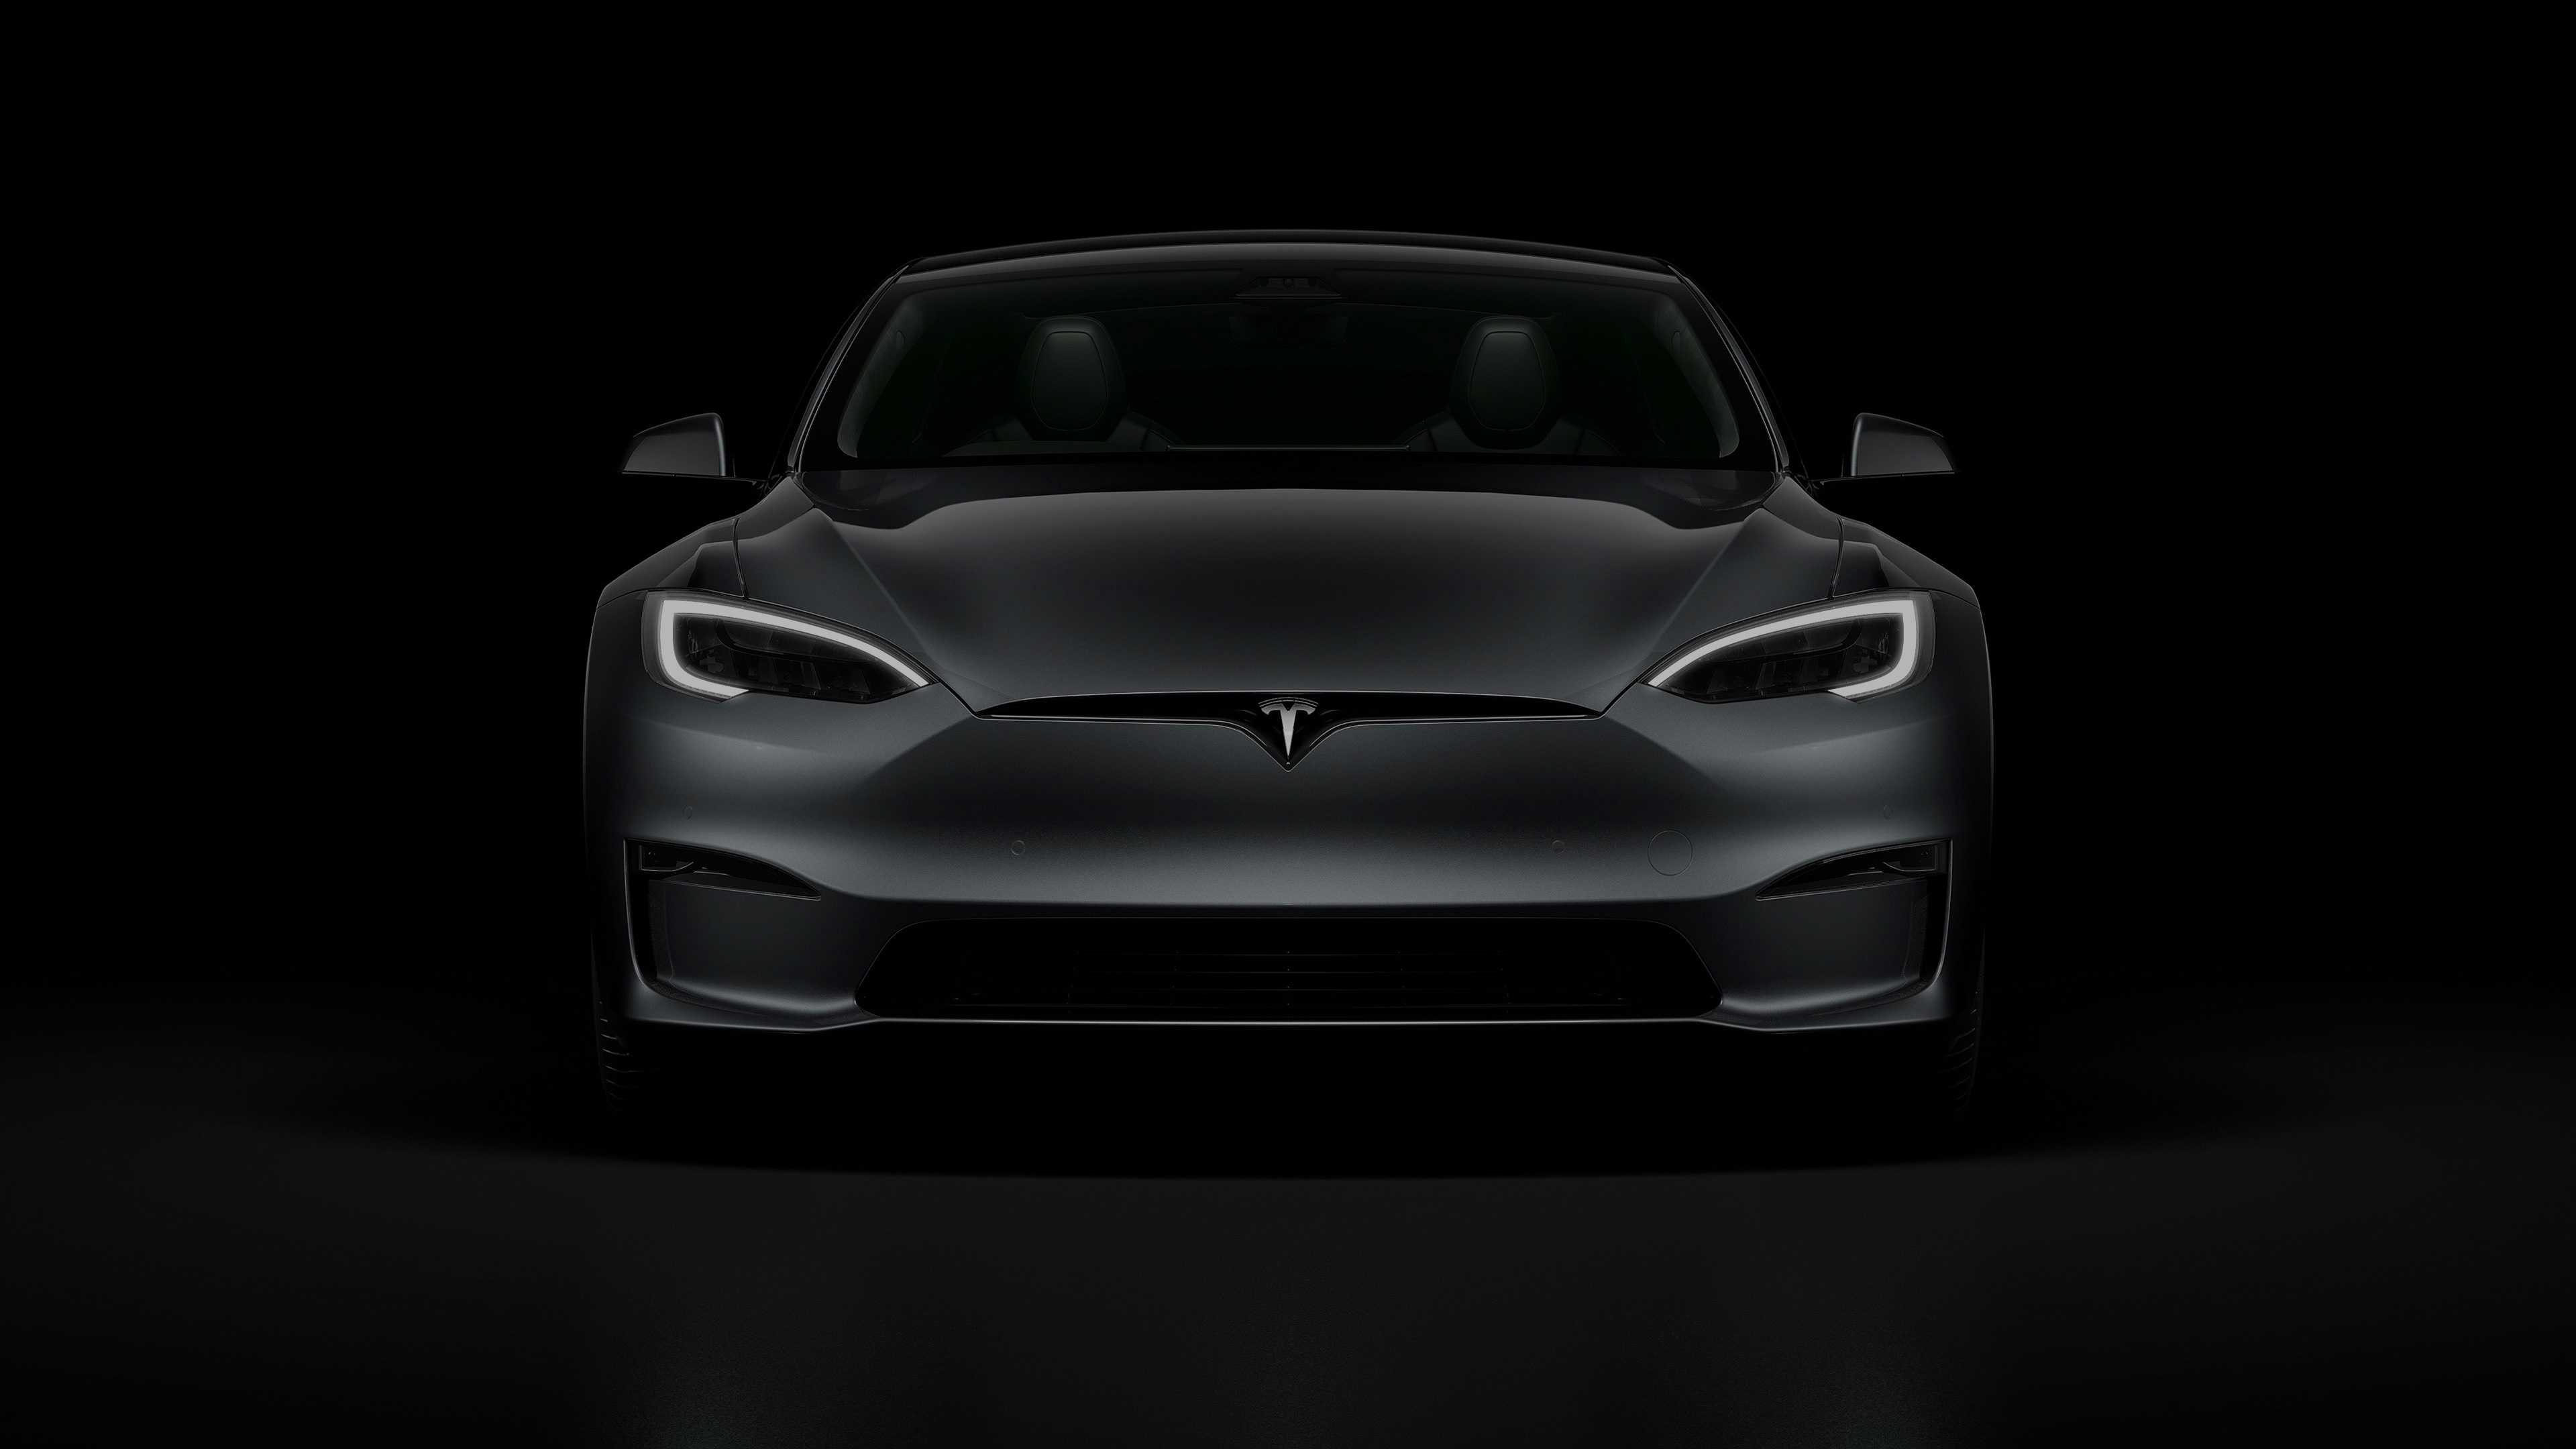 Tesla k wallpapers for your desktop or mobile screen free and easy to download